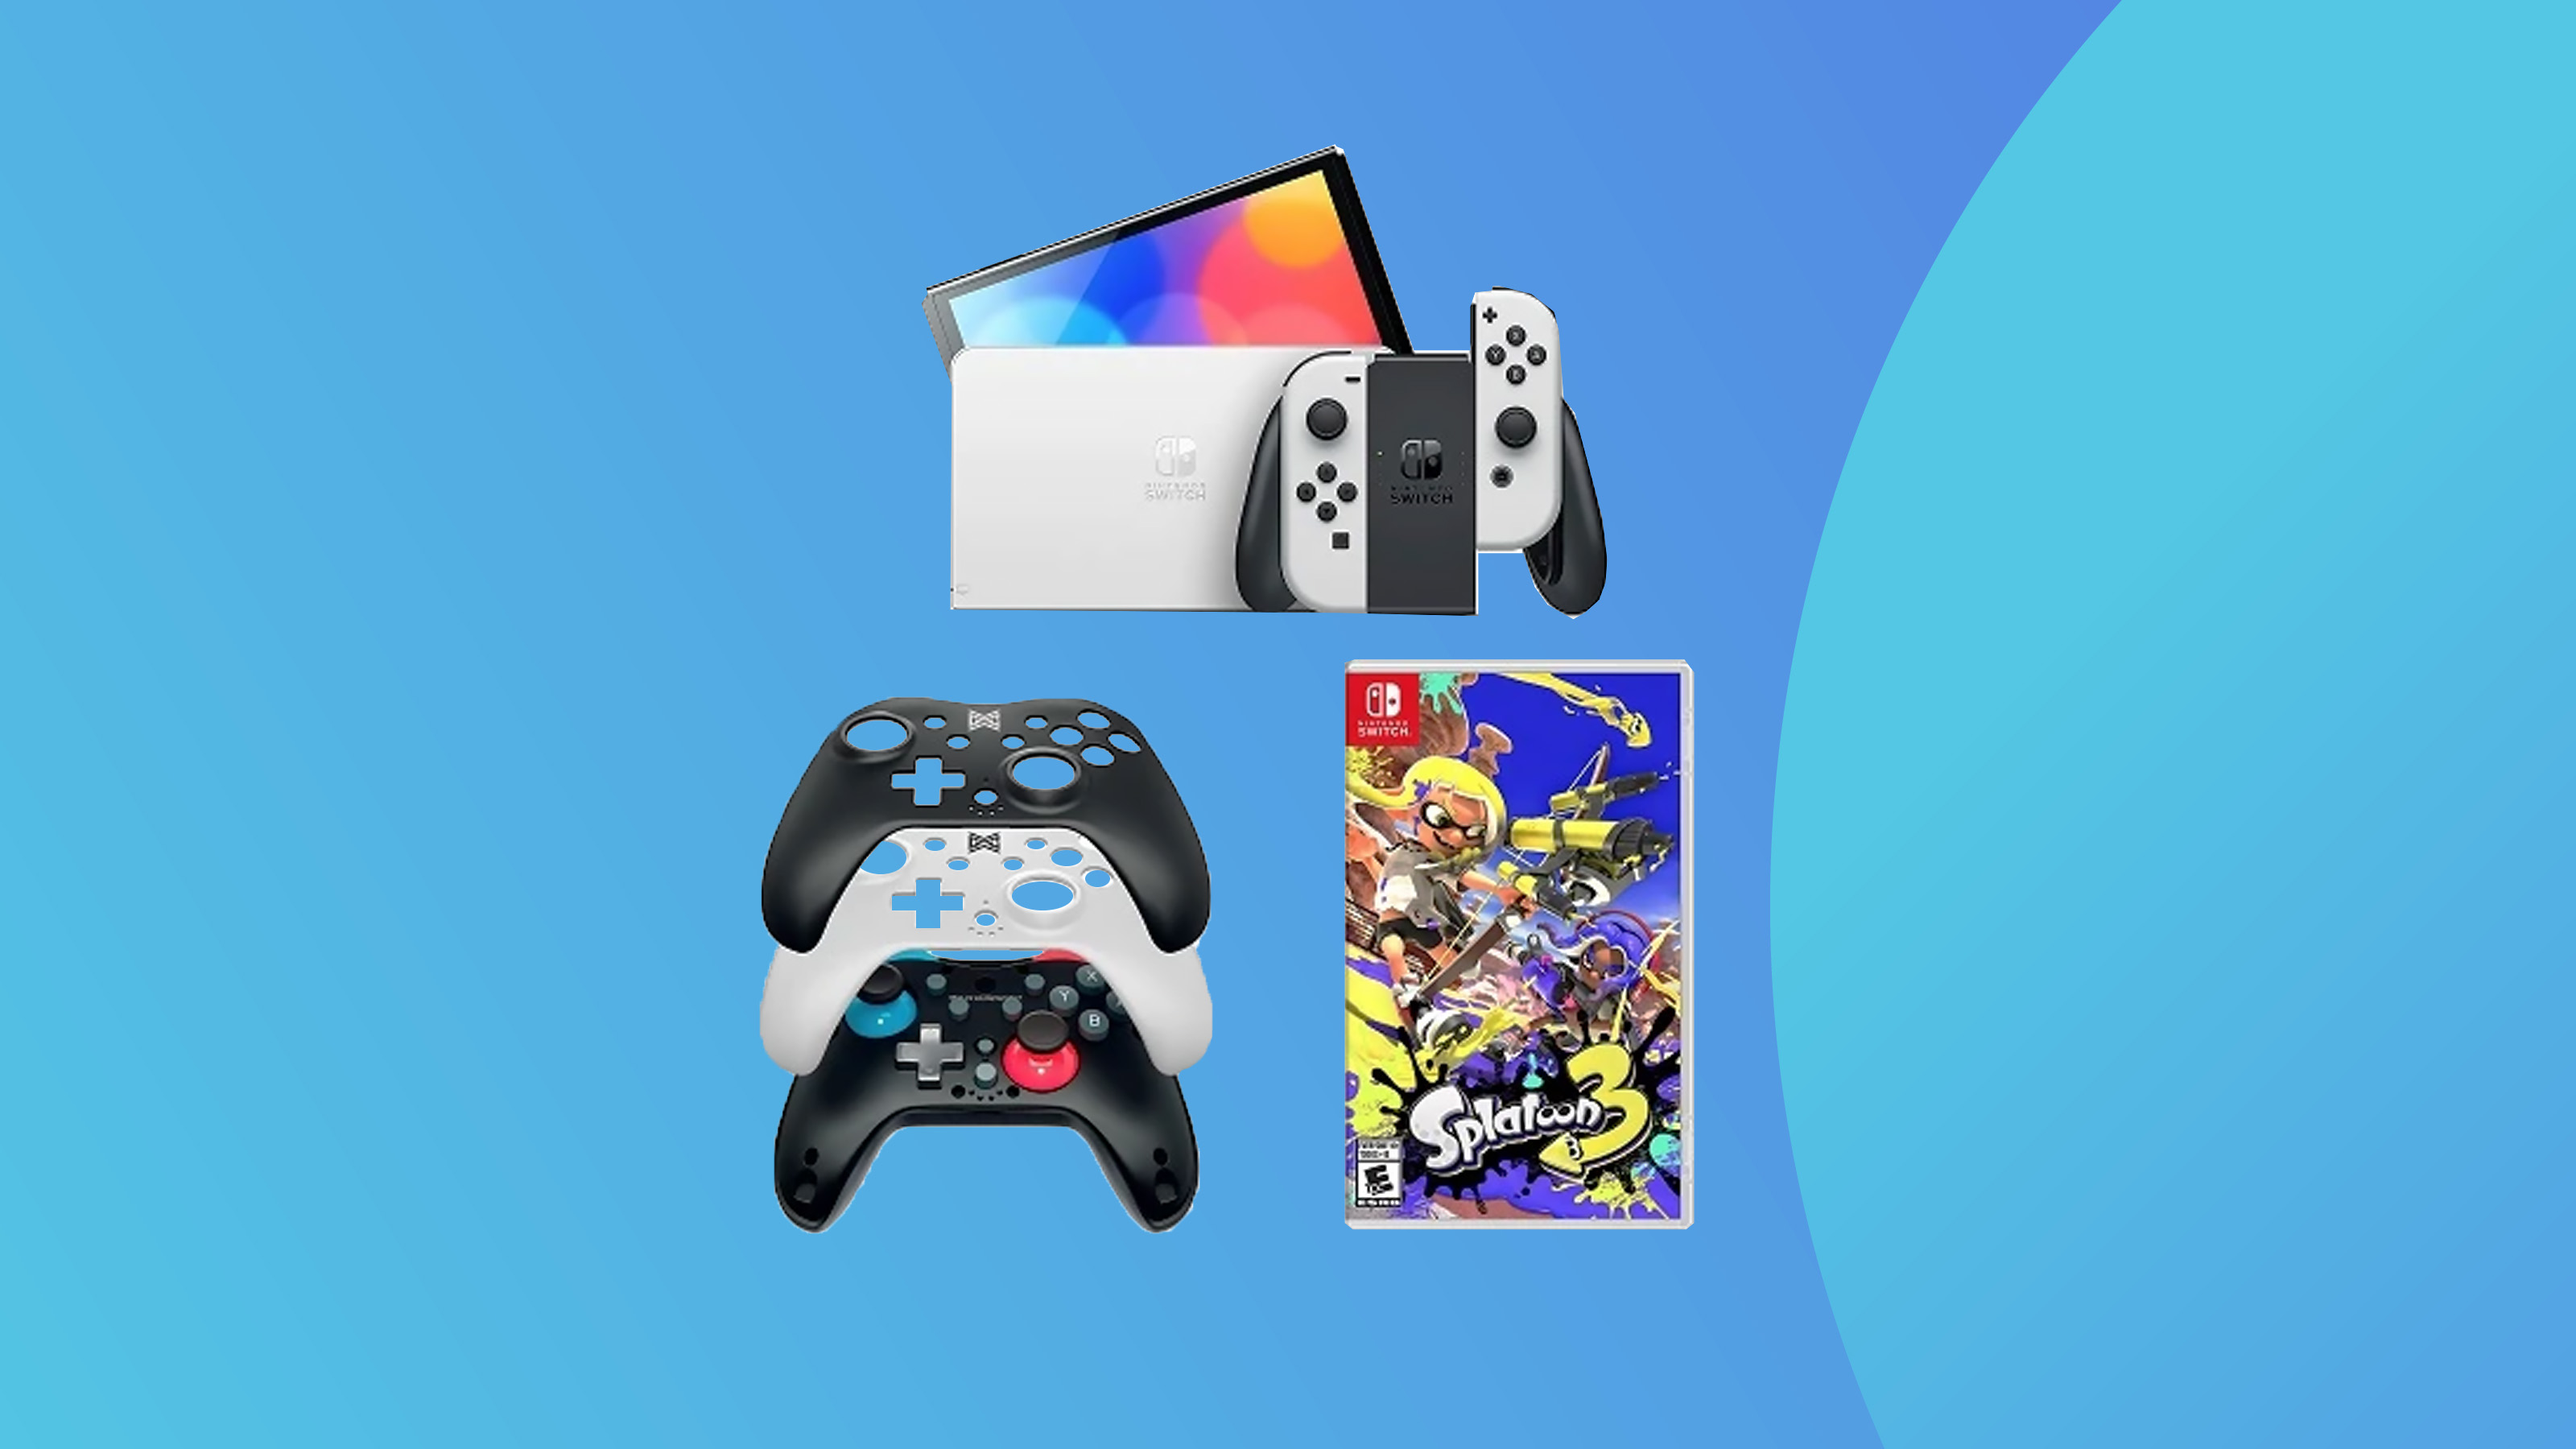 A product photo of Switch Oled and its accessories on a colored background